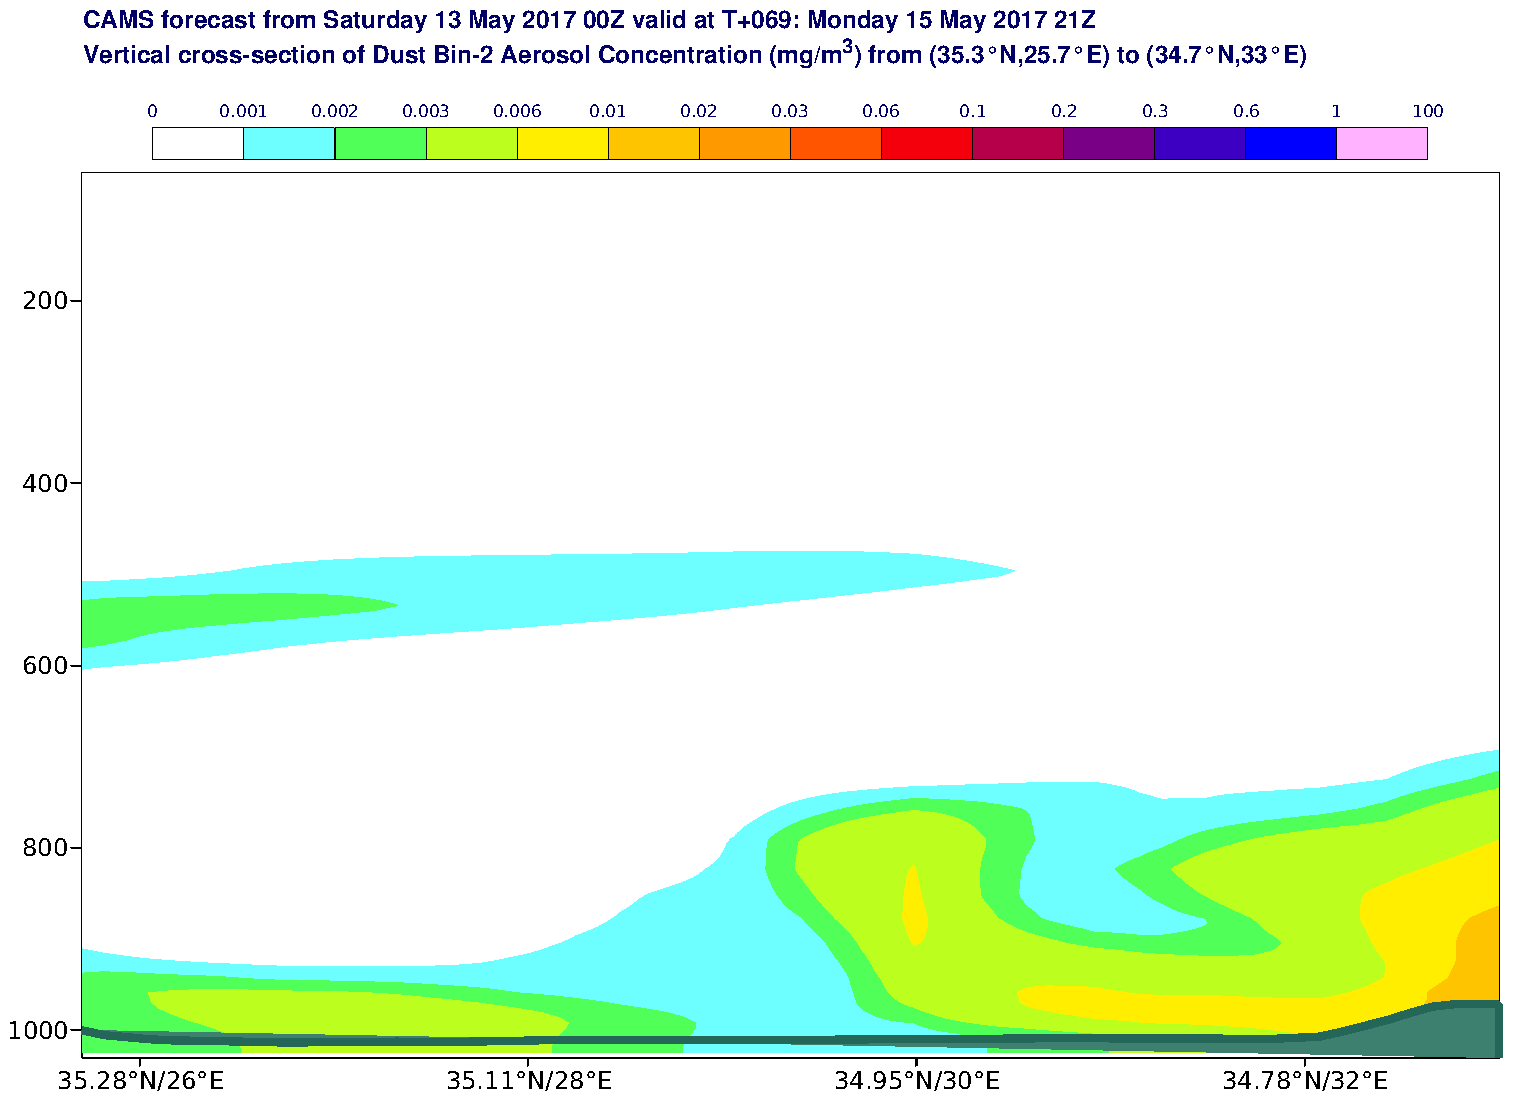 Vertical cross-section of Dust Bin-2 Aerosol Concentration (mg/m3) valid at T69 - 2017-05-15 21:00